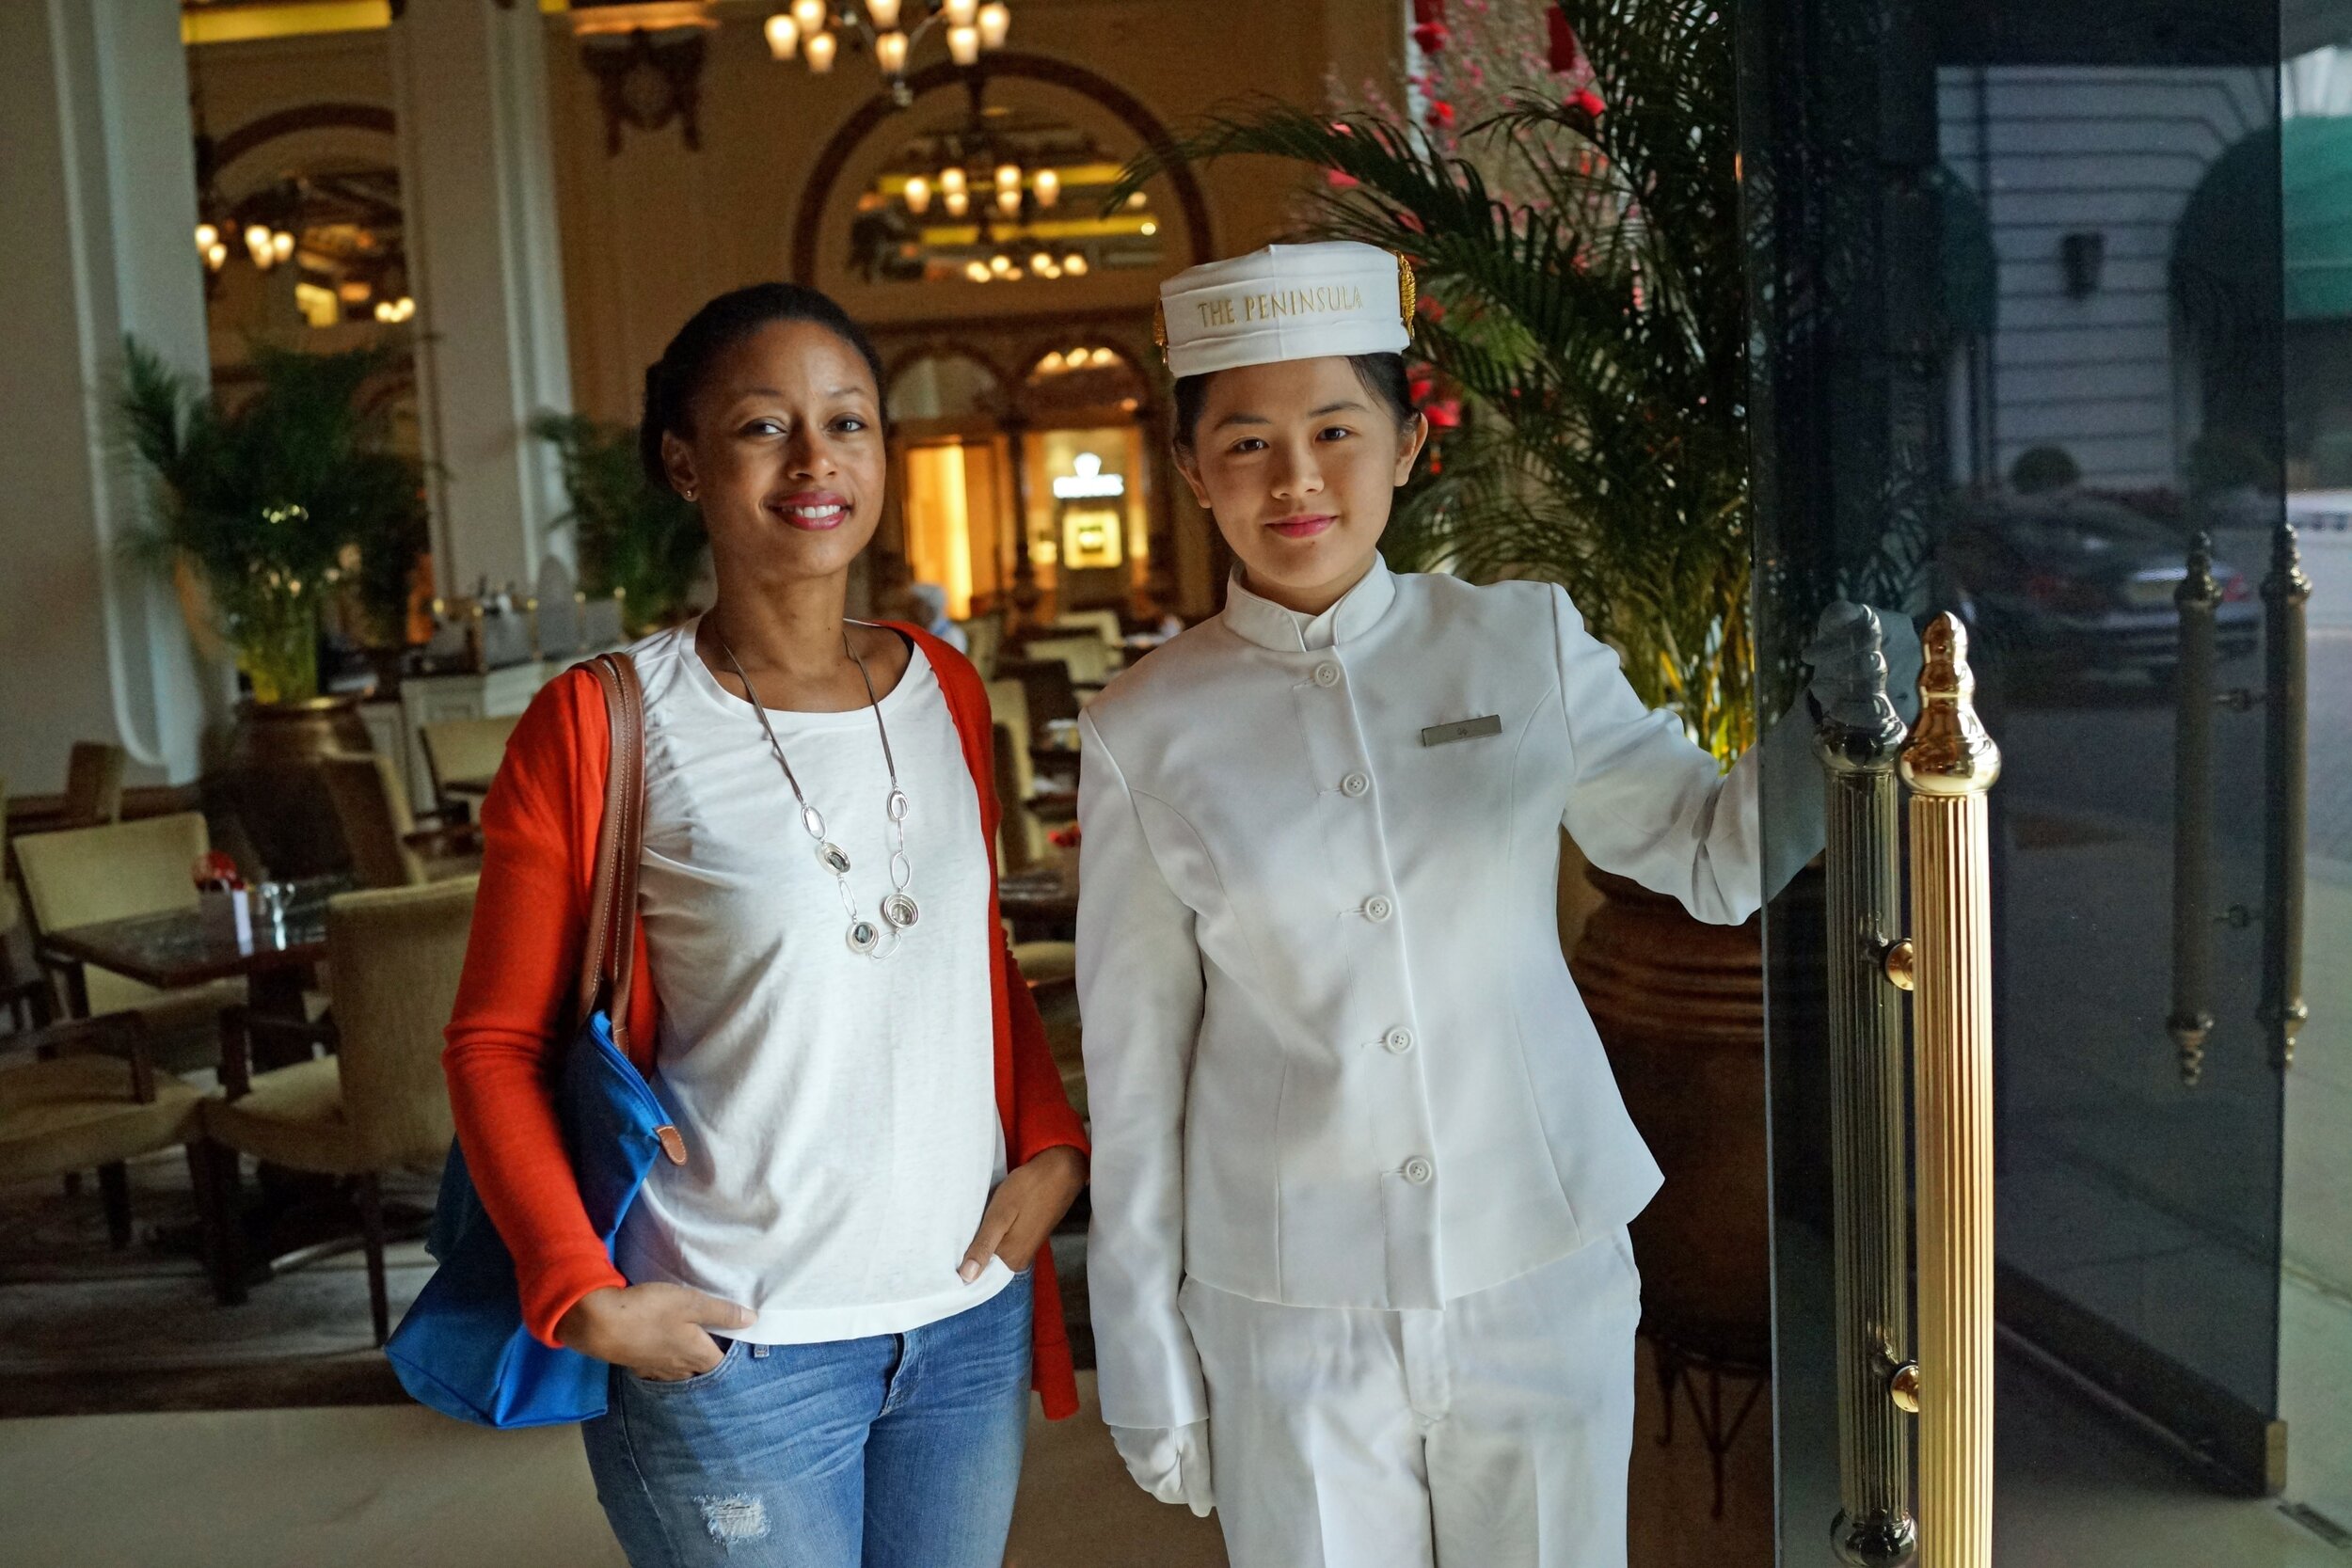 My Private Tour Guest at the Peninsula Hotel, Kowloon, TST, Hong Kong